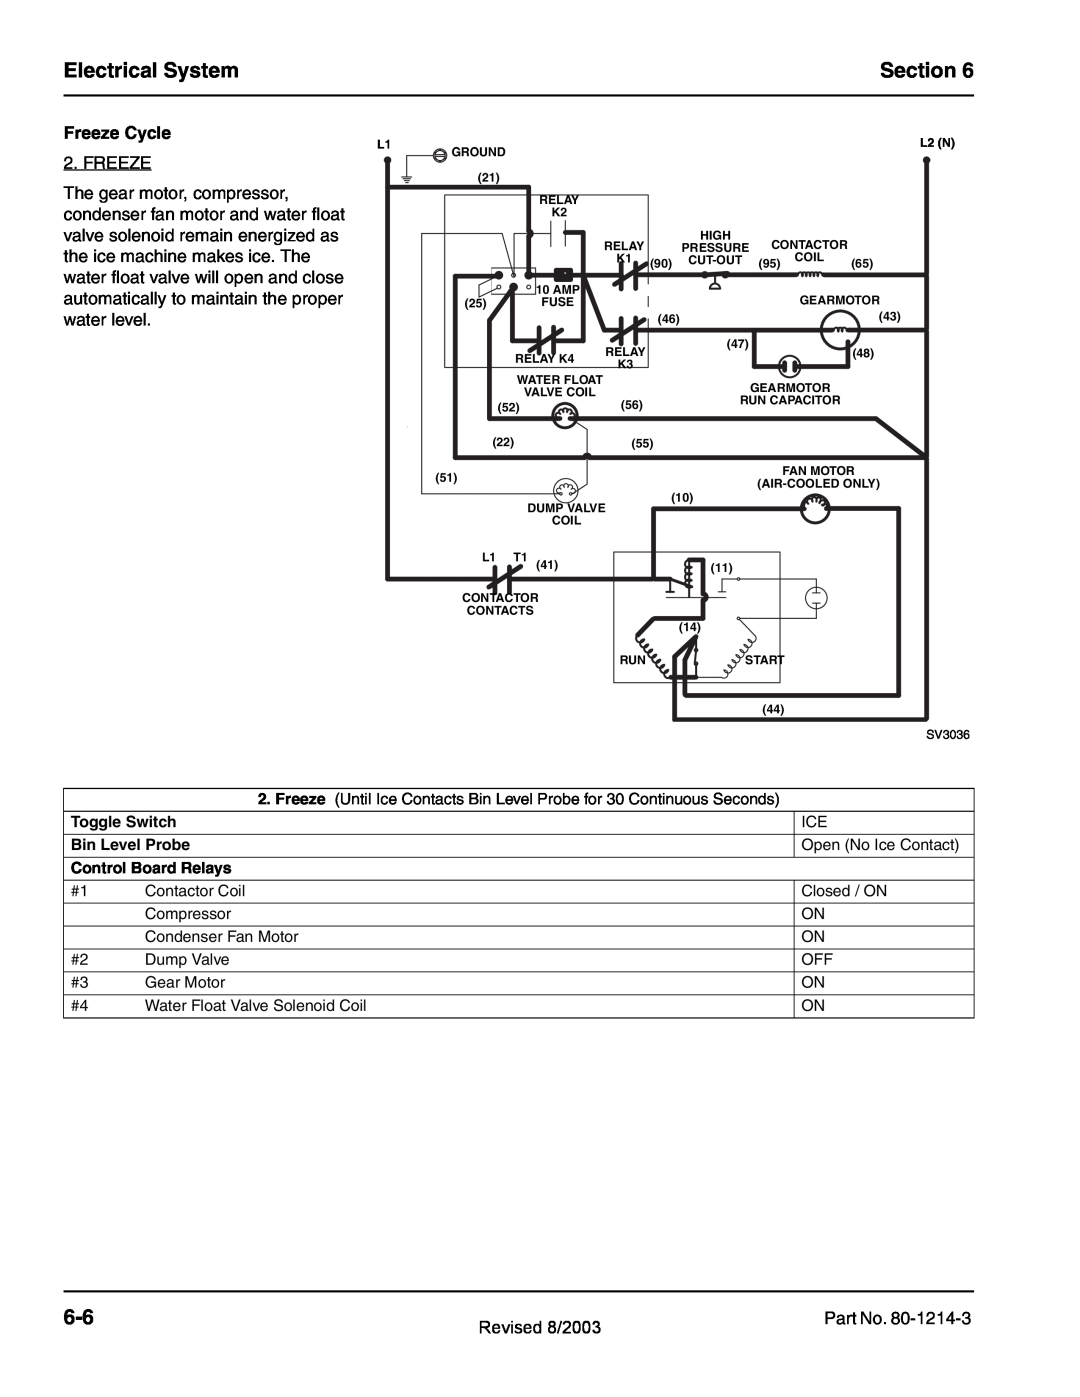 Manitowoc Ice QF0400, QF2300, QF0800, QC0700, QF2200 service manual Electrical System, Section, Freeze Cycle 